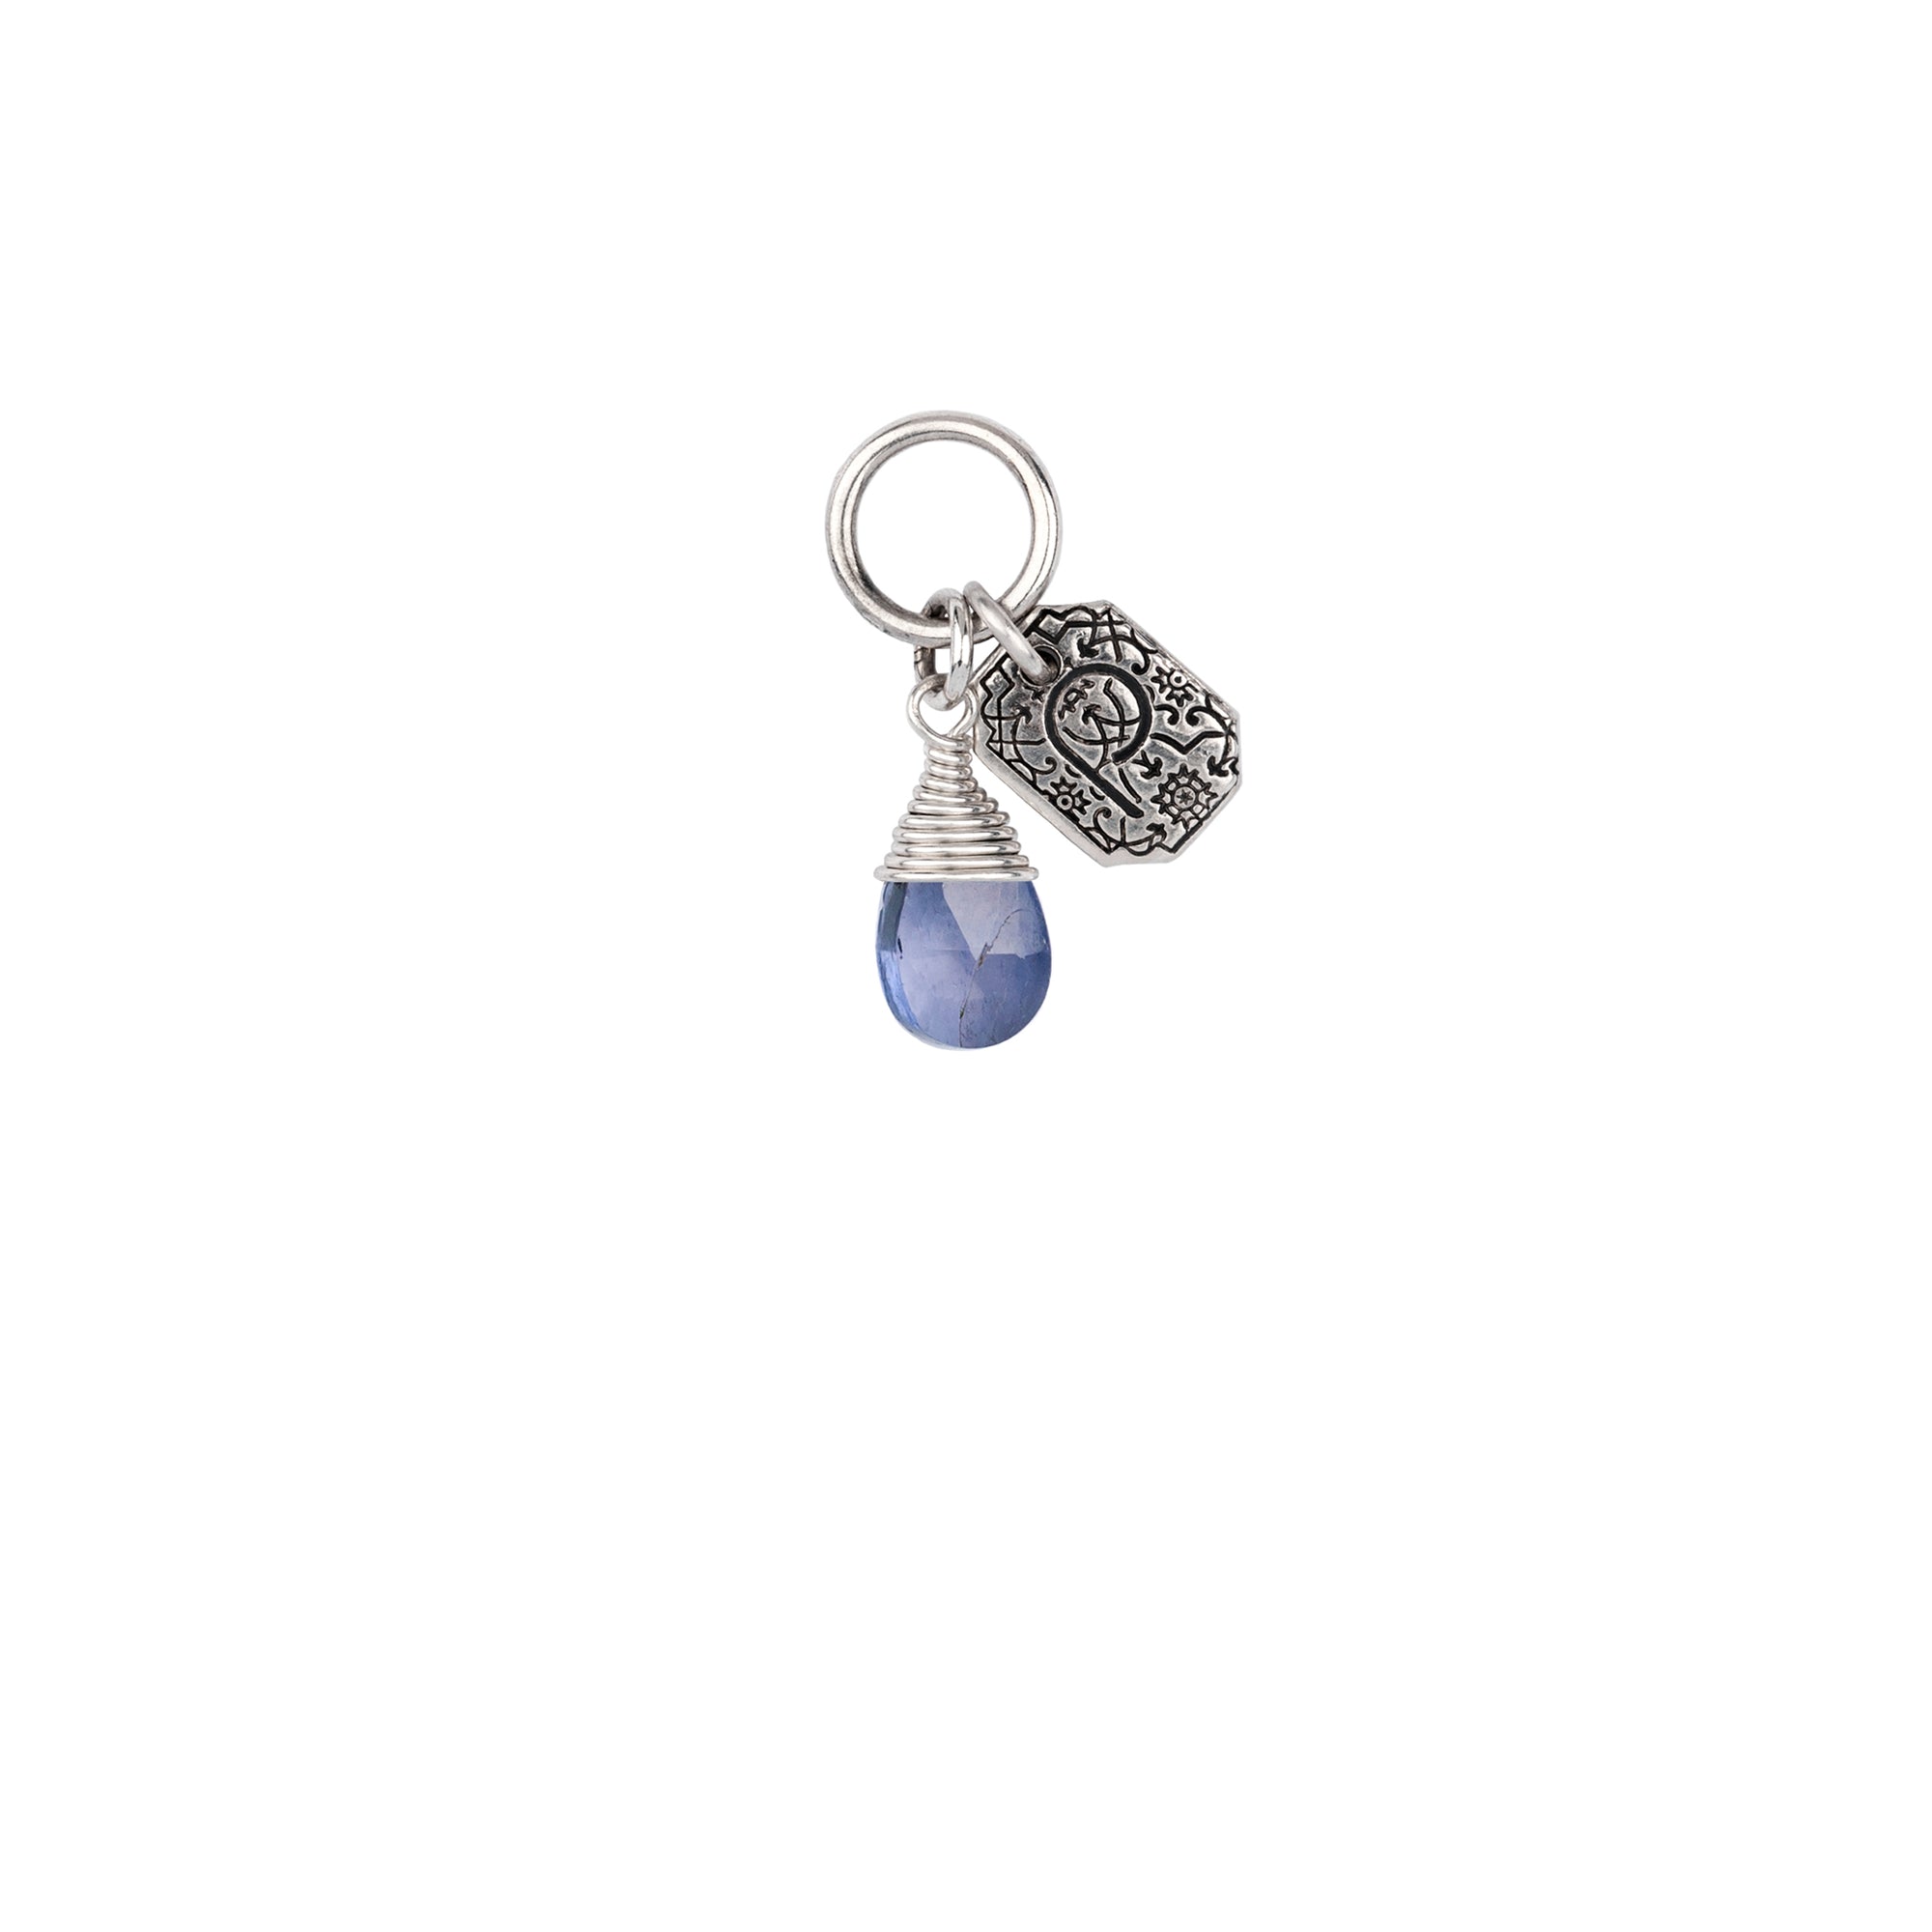 A sterling silver signature attraction charm capped with a Lolite stone.